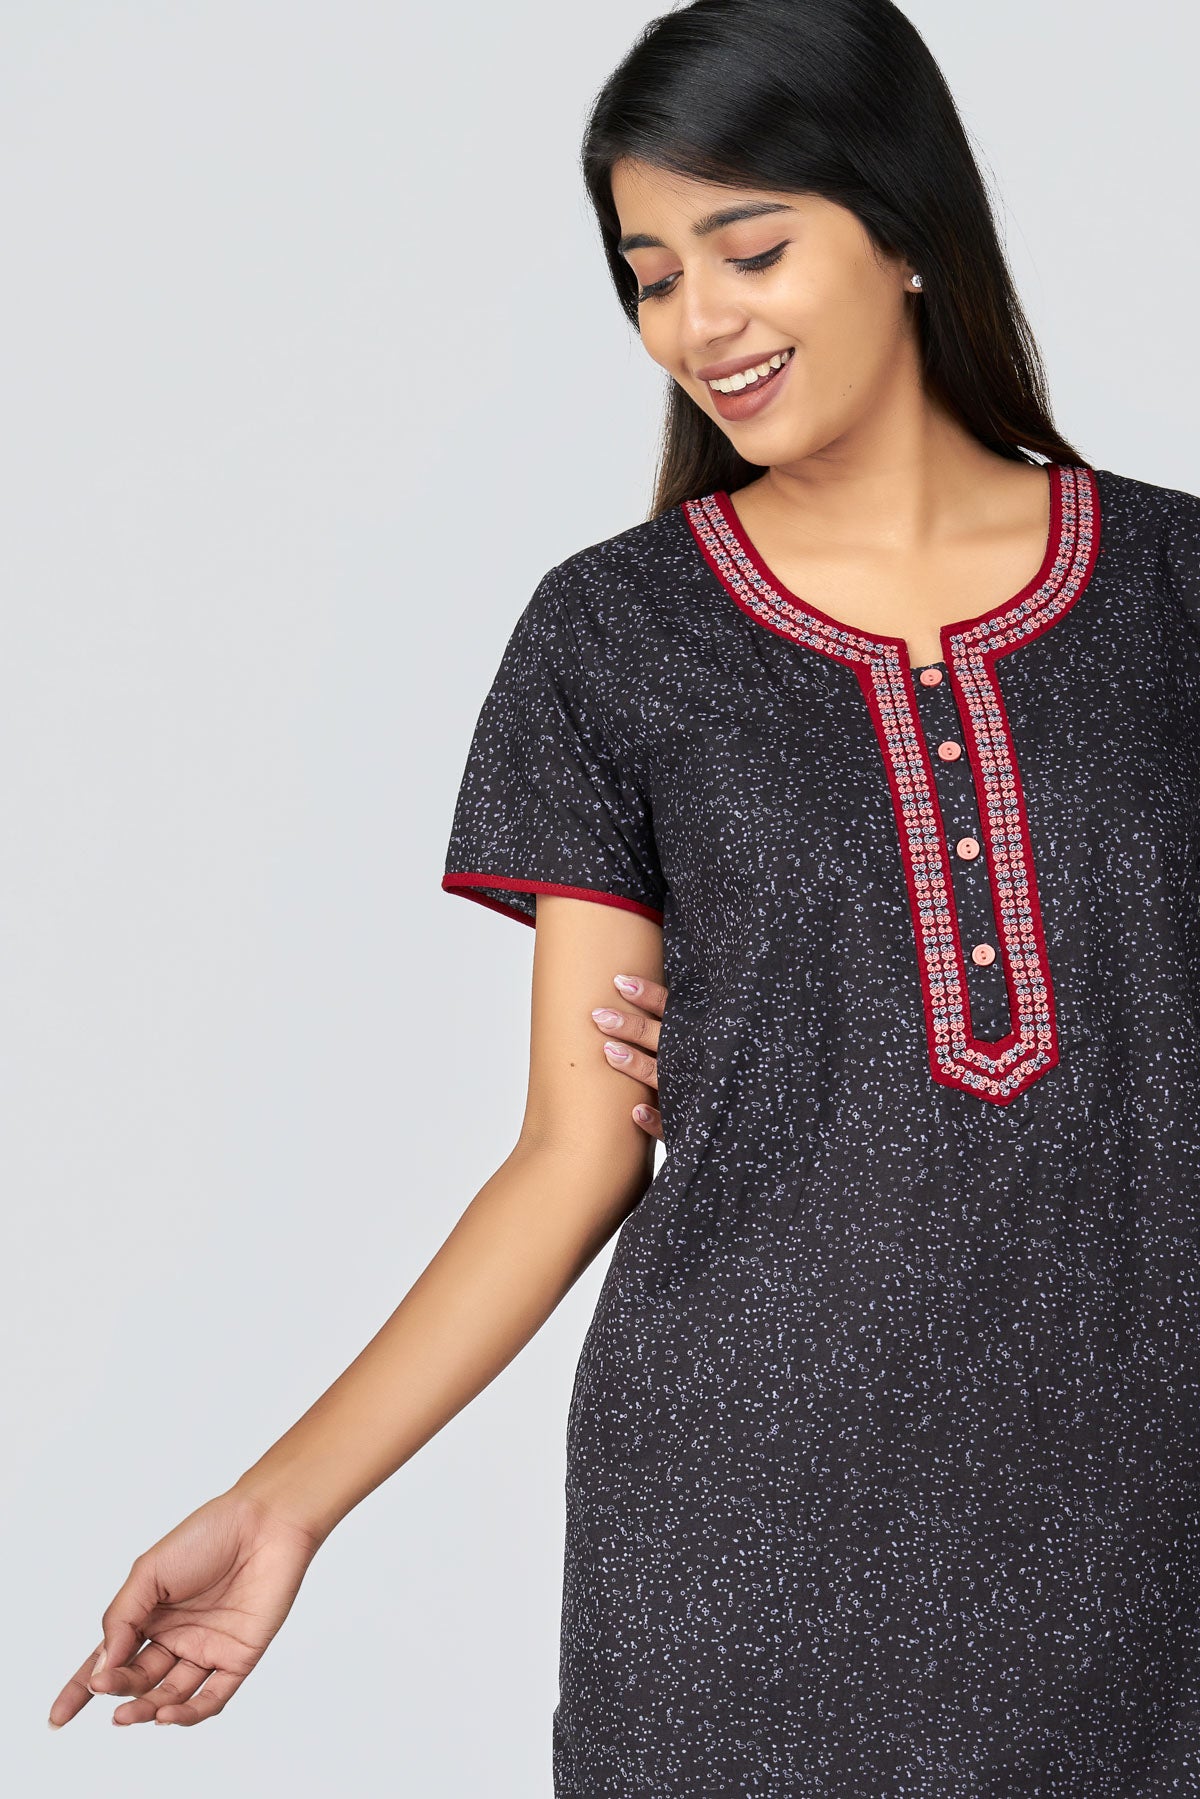 All Over Dots Printed Nighty - Black